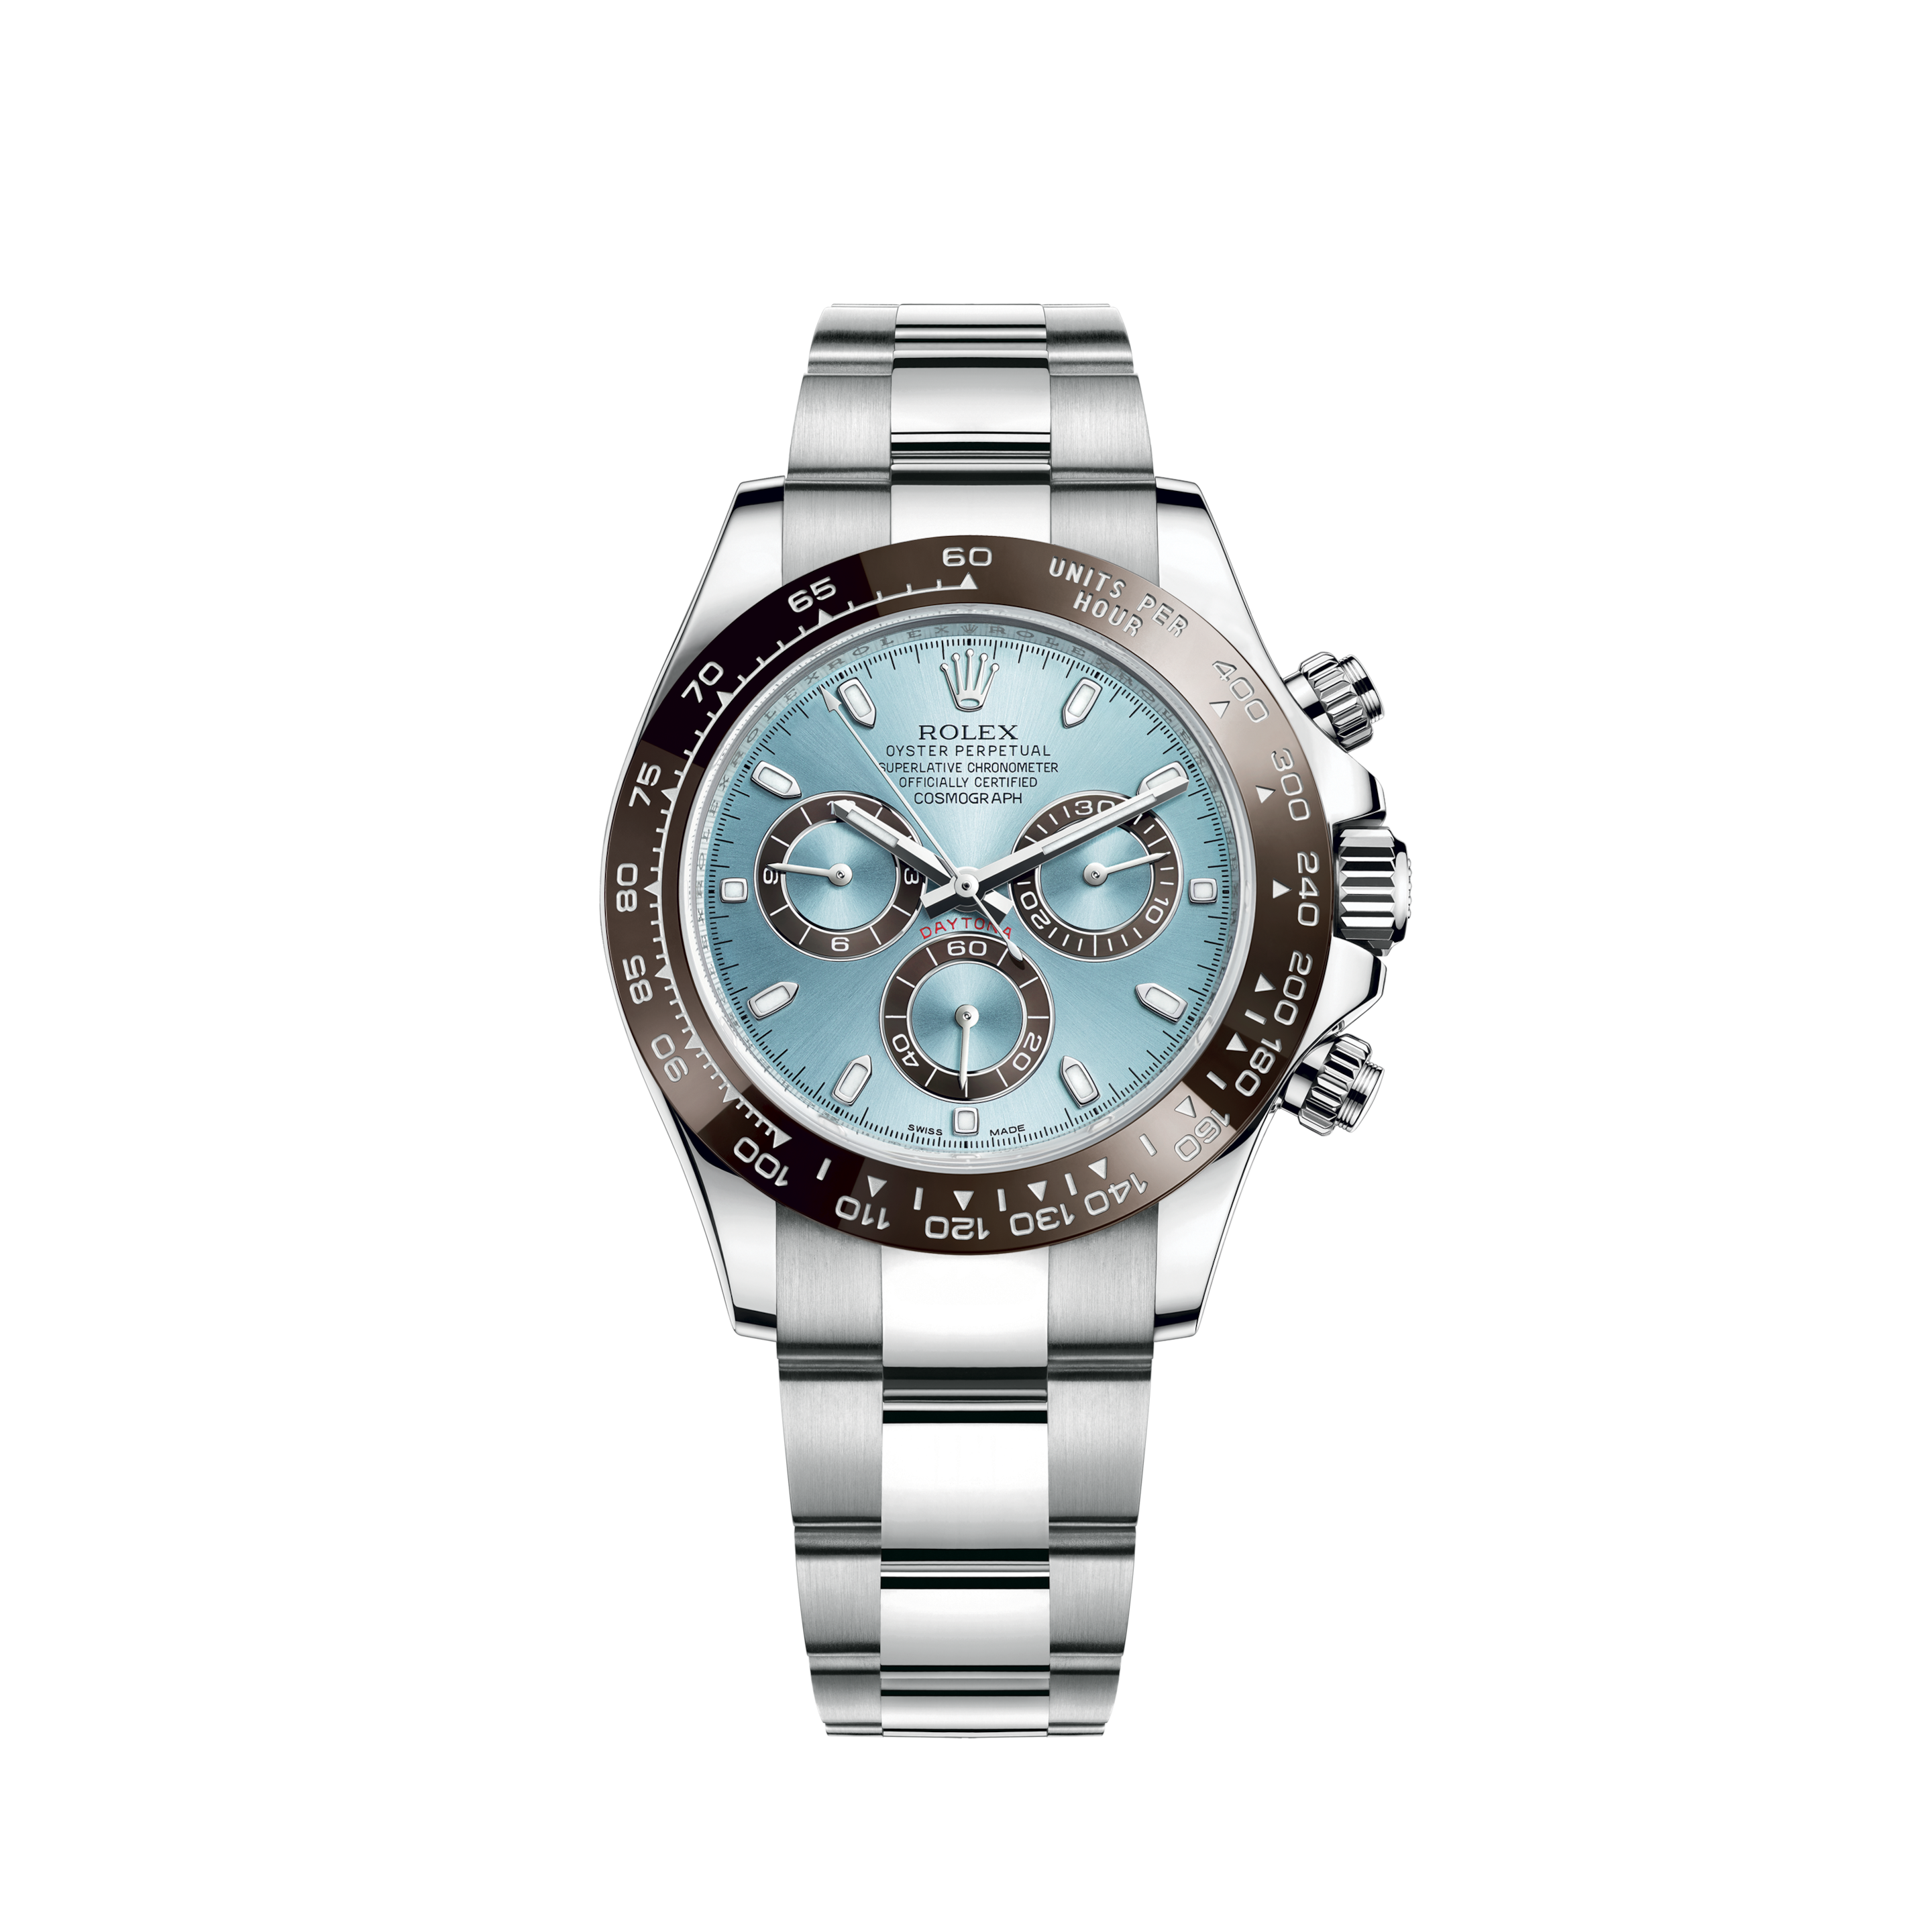 Rolex Yacht-Master 40 Automatic Blue Dial Oystersteel and Platinum Men's Watch - 126622 blue